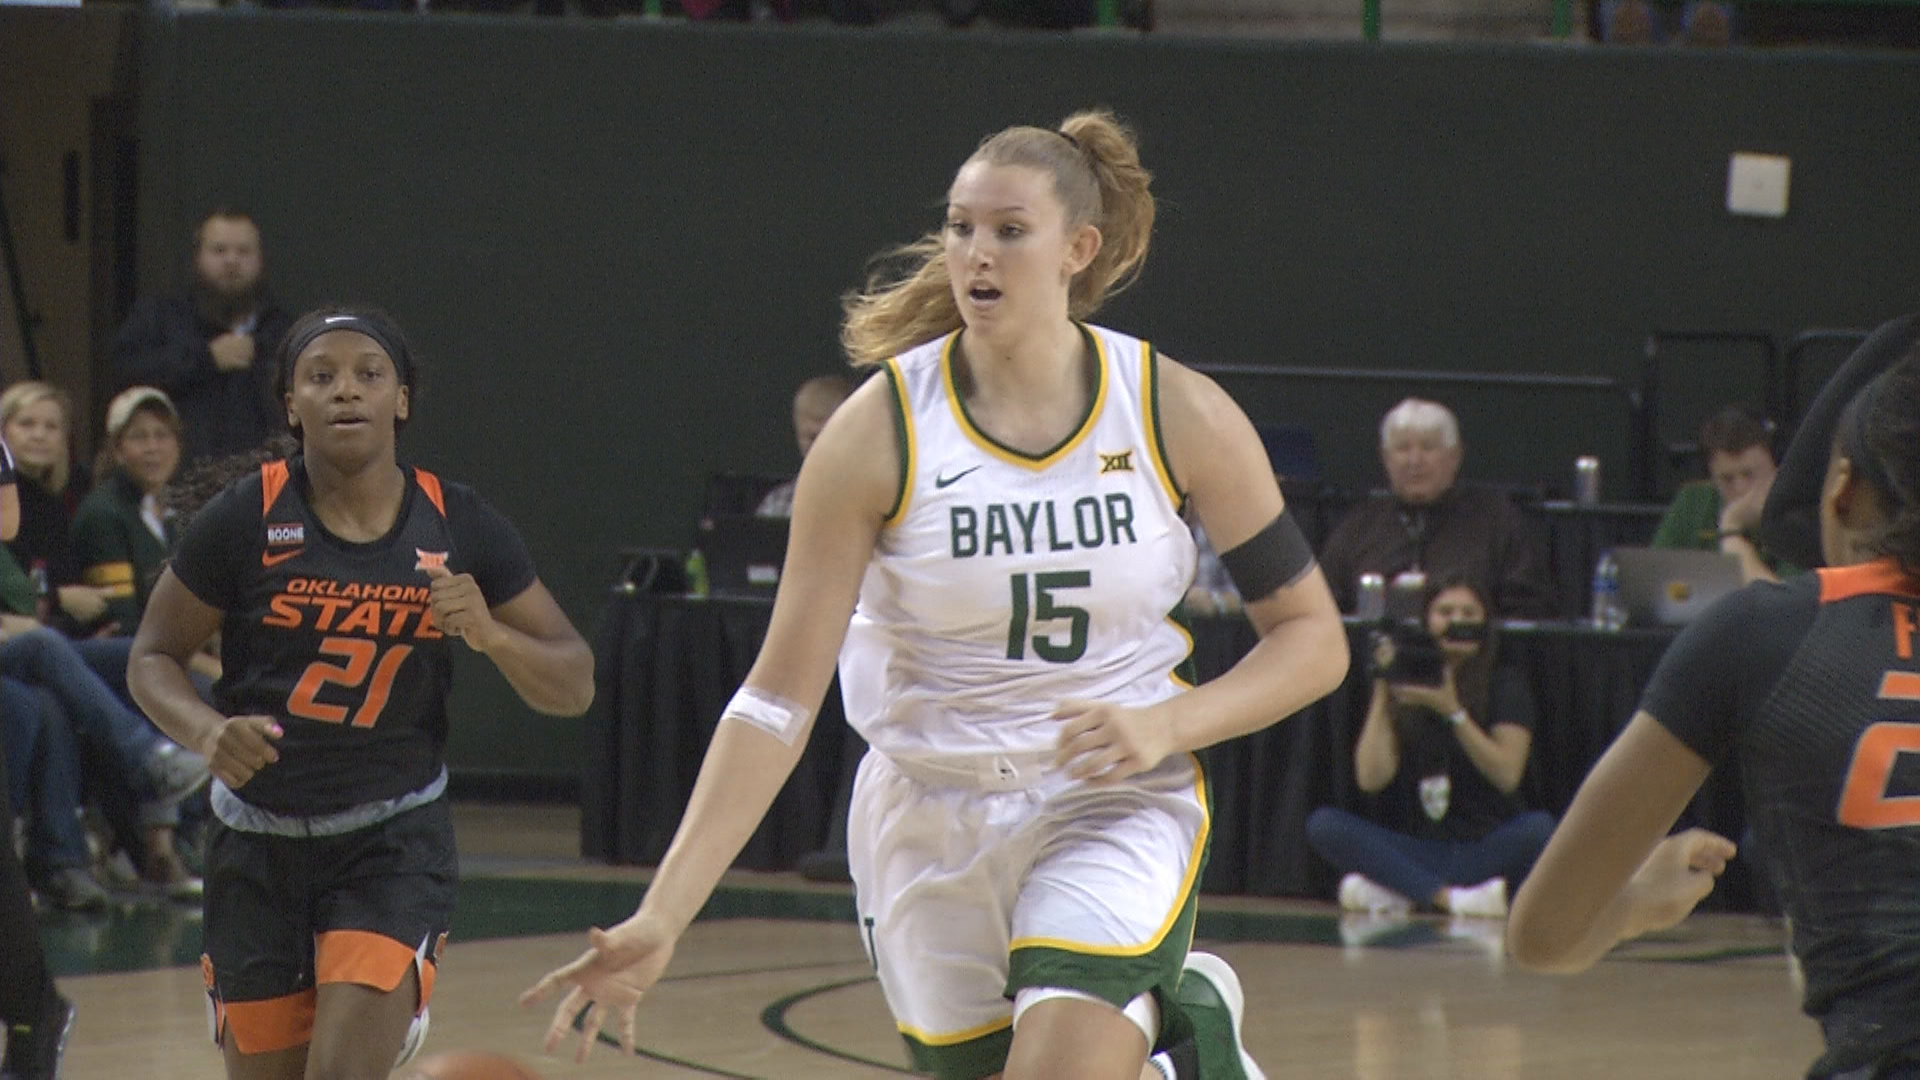 A win would give the Lady Bears a Big 12 record 45th-straight win in the regular season.